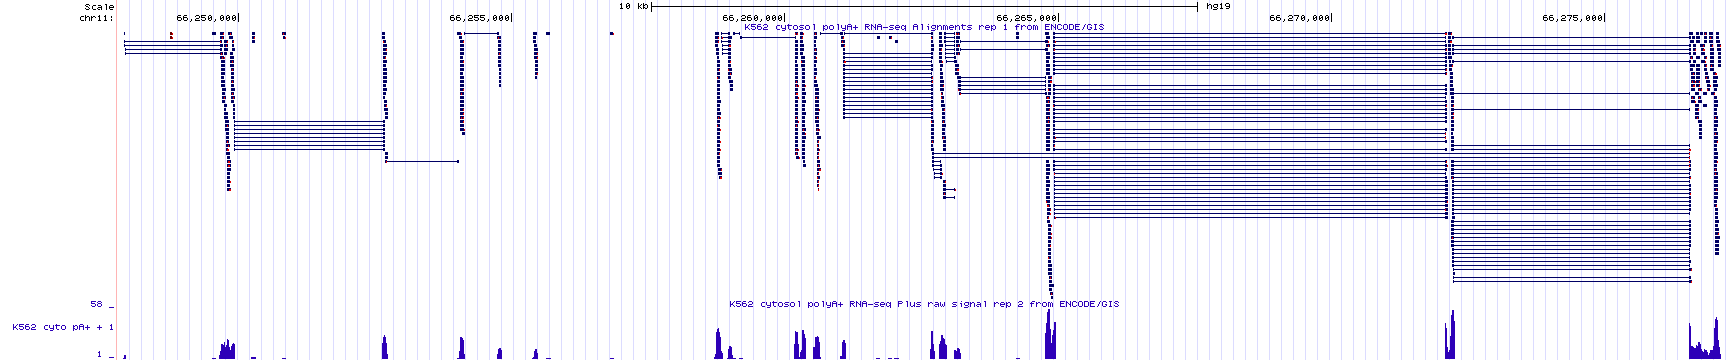 A close up view of exon 4 of BBS1. Notice the Y axis for the histogram indicates that the maximum number of sequence reads that map to this region is 11. The height for any given region of the histogram is determined by the number of reads counted. On the left, I highlight a region of exon 4 that has 5 total reads. On the right I highlight a region of exon 4 that has 2 total reads. Click image to enlarge.